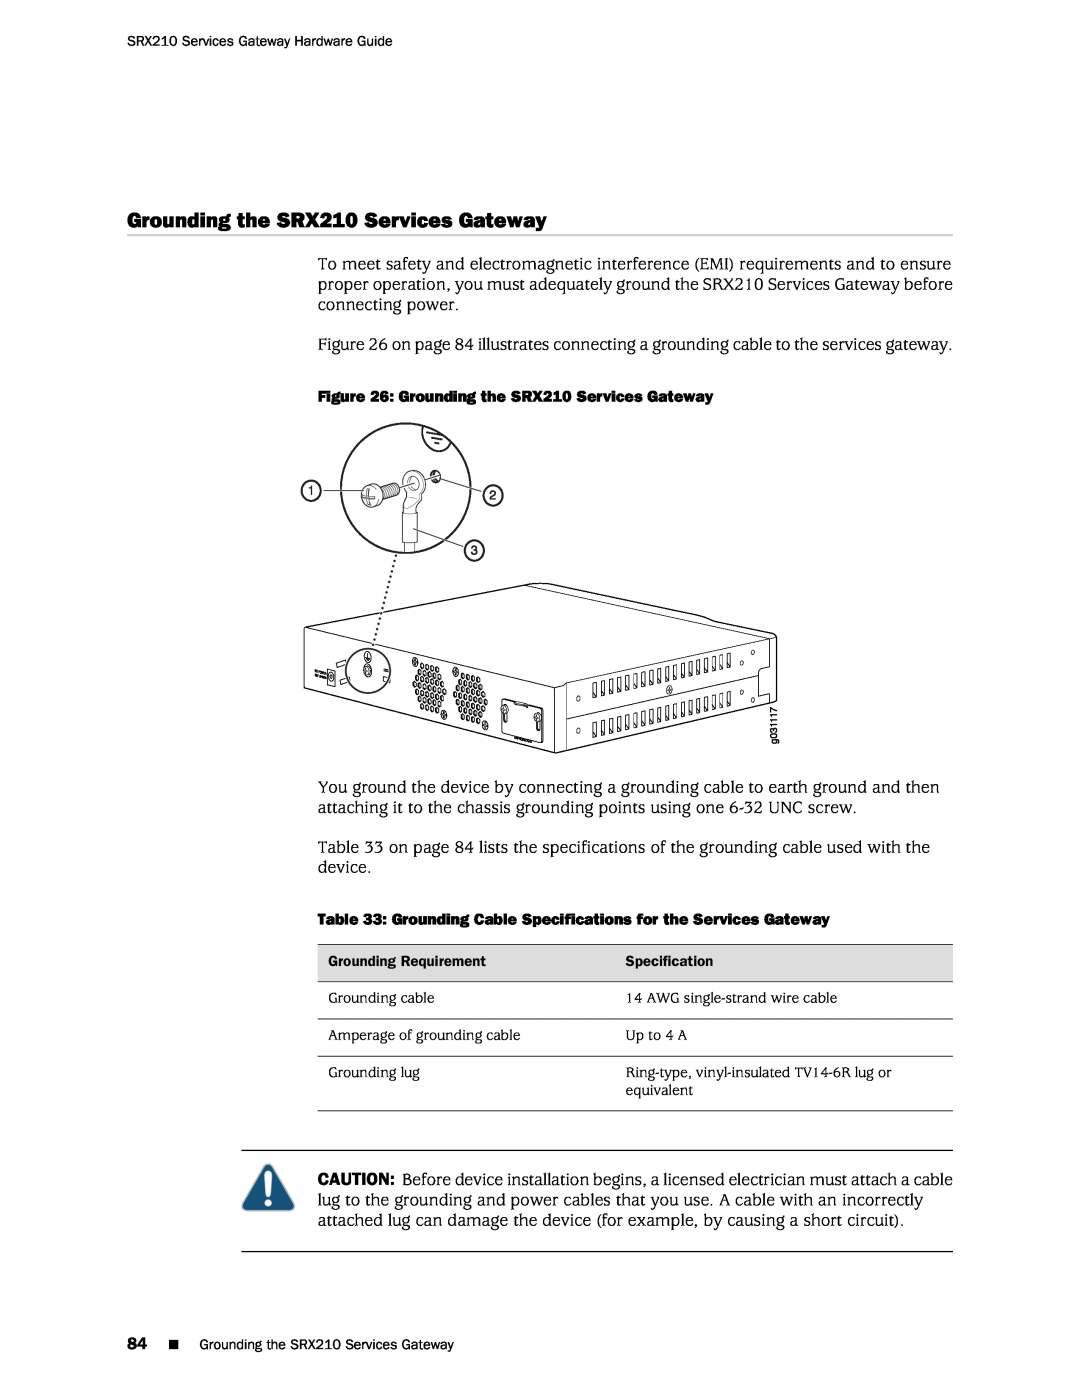 Juniper Networks SRX 210 Grounding the SRX210 Services Gateway, Grounding Cable Specifications for the Services Gateway 